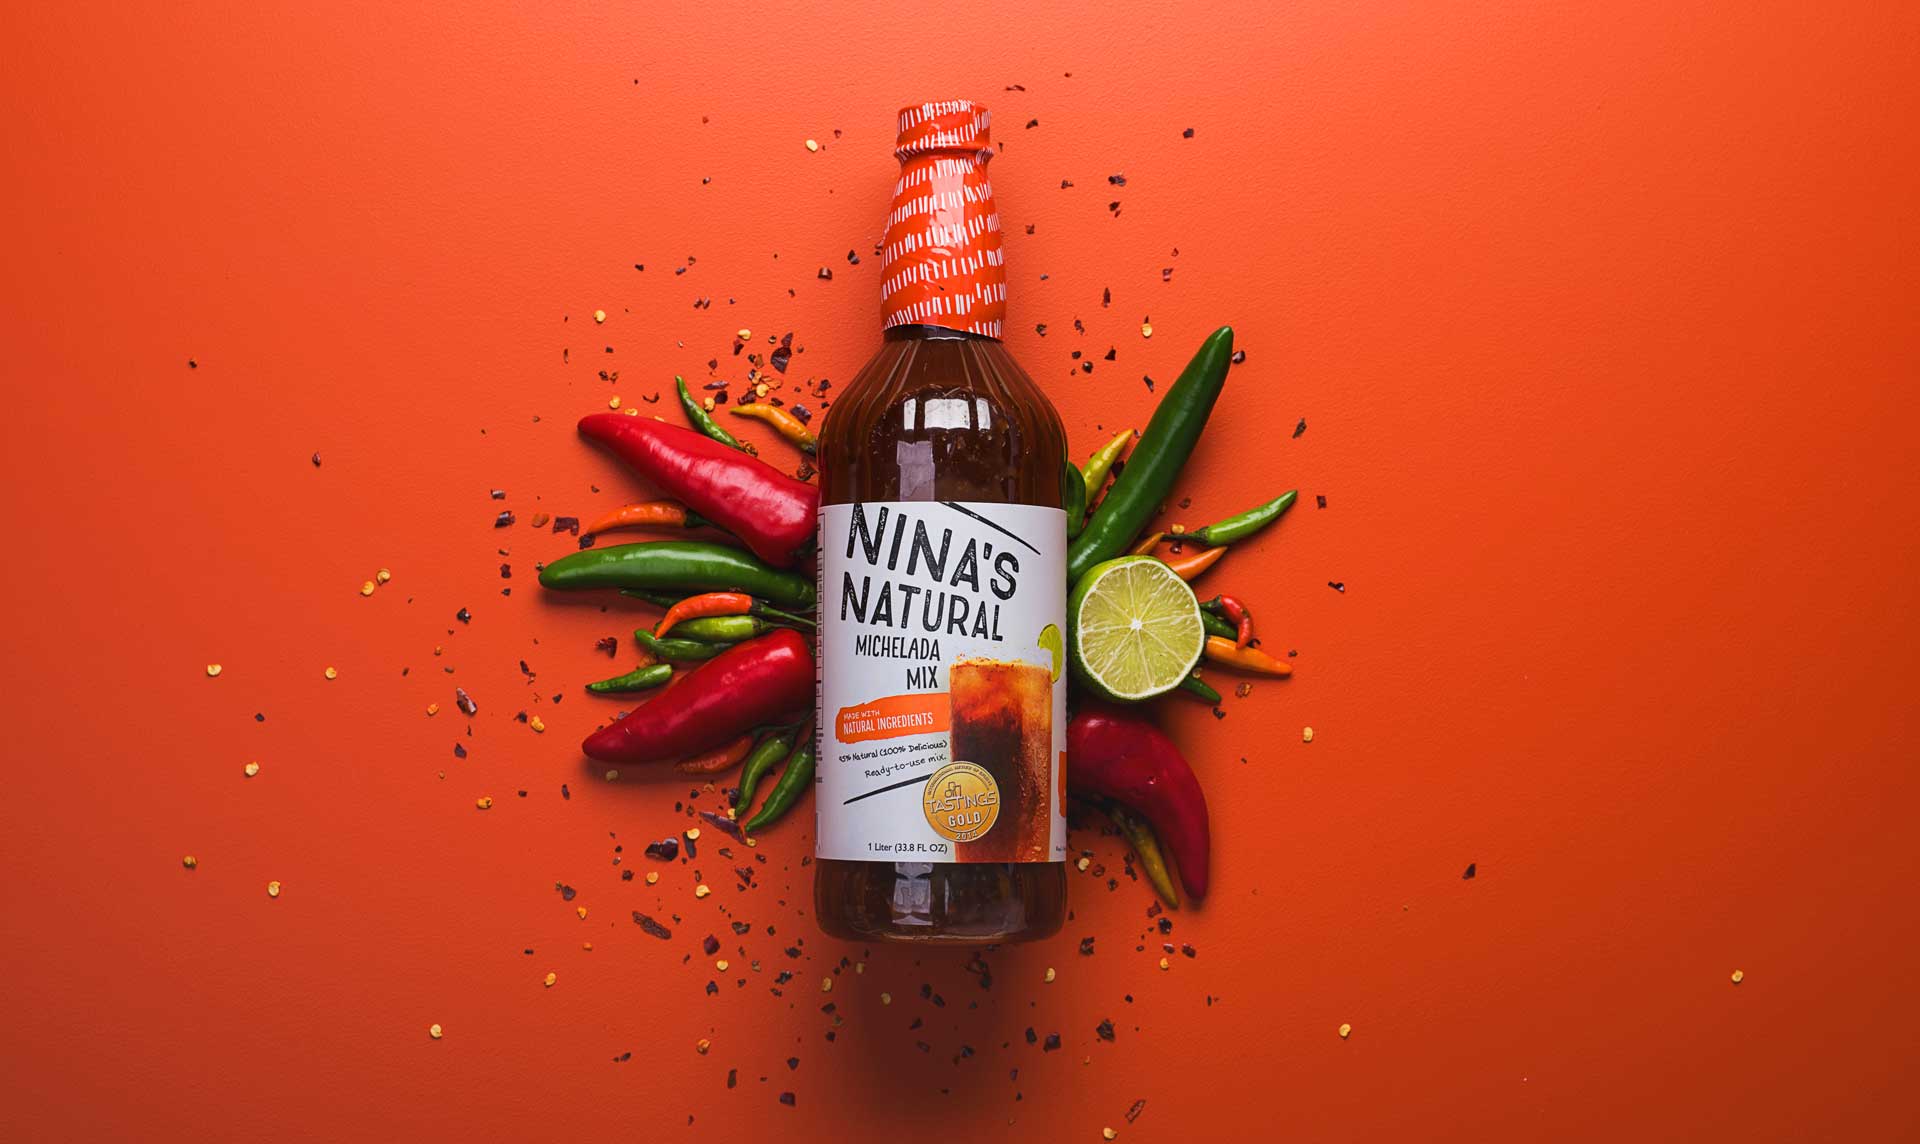 Nina's Natural Branding and Packaging Design with peppers